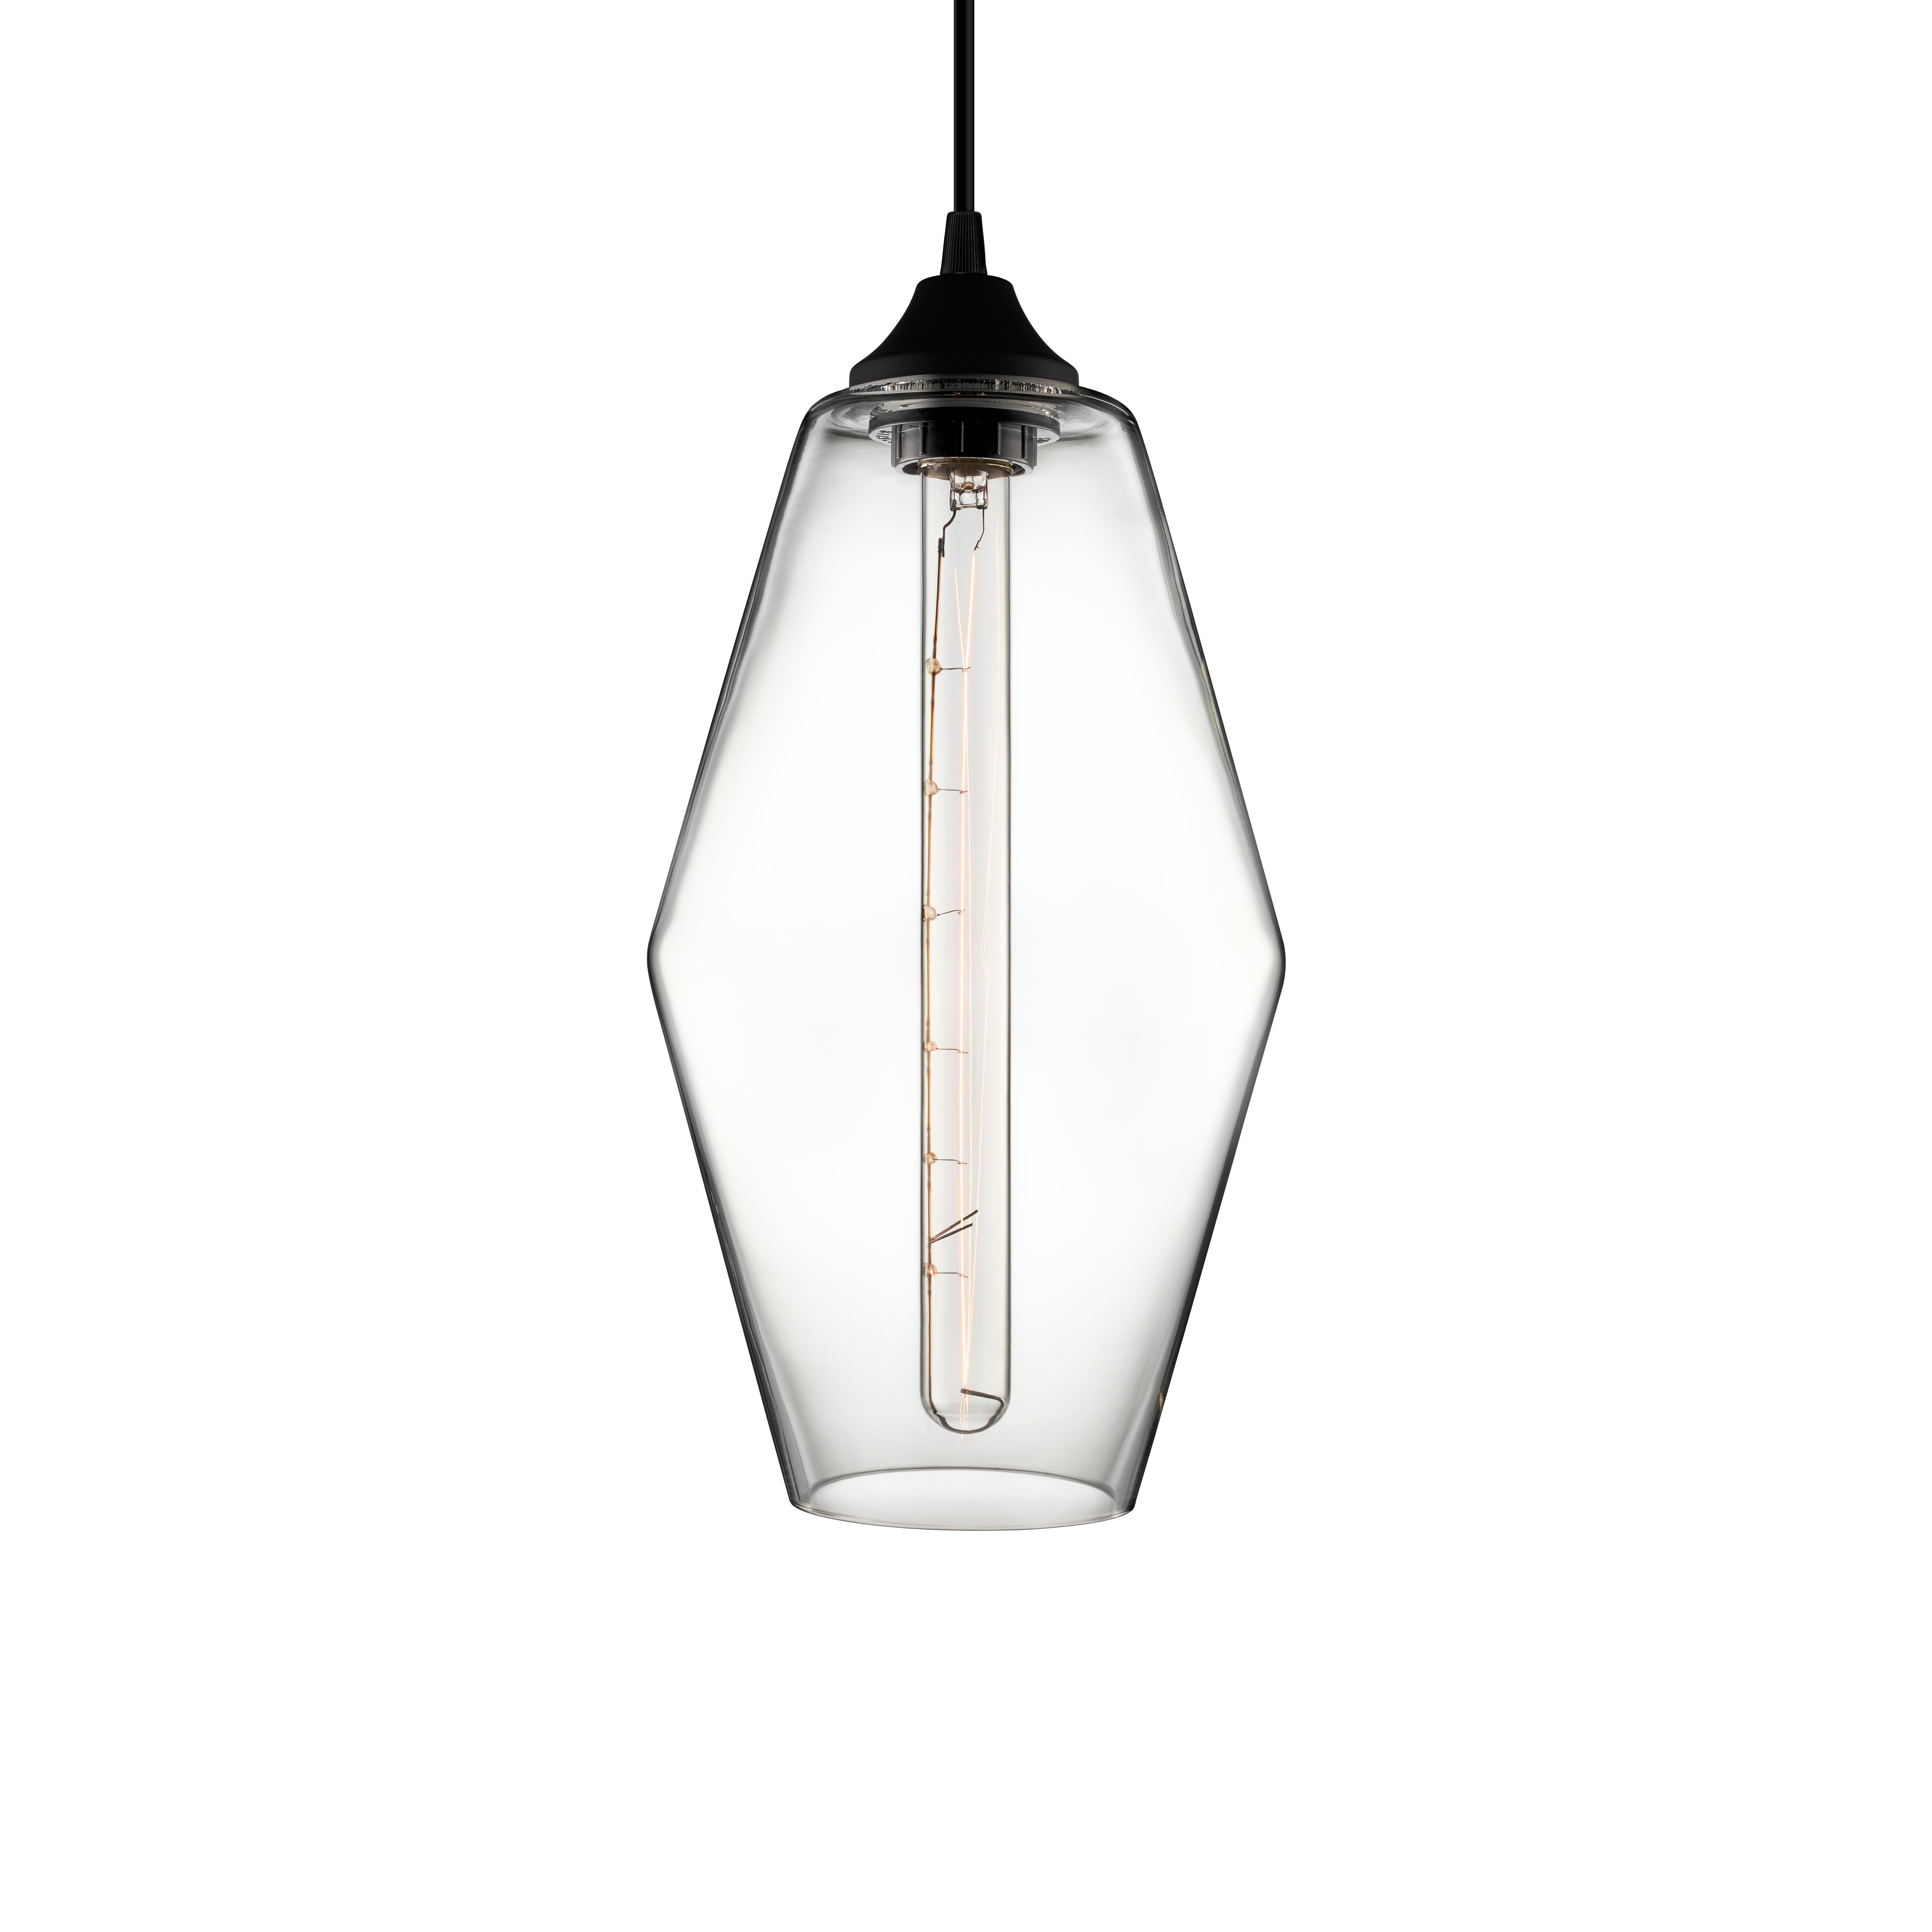 Marquise Crystal Handblown Modern Glass Pendant Light, Made in the USA